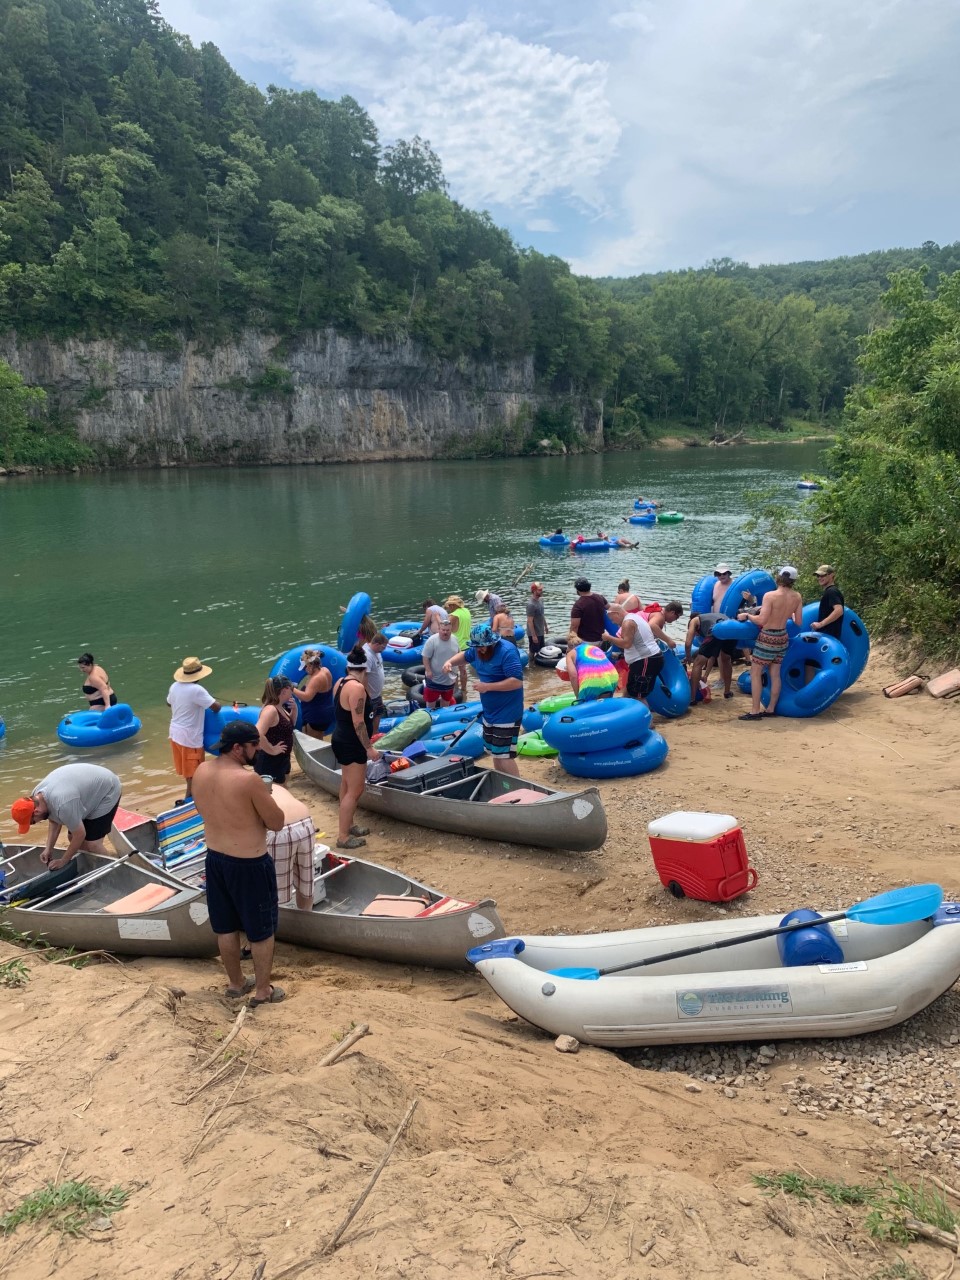 A group of individuals on a river sand bar standing around innertubes, canoes and rafts next to a blue river